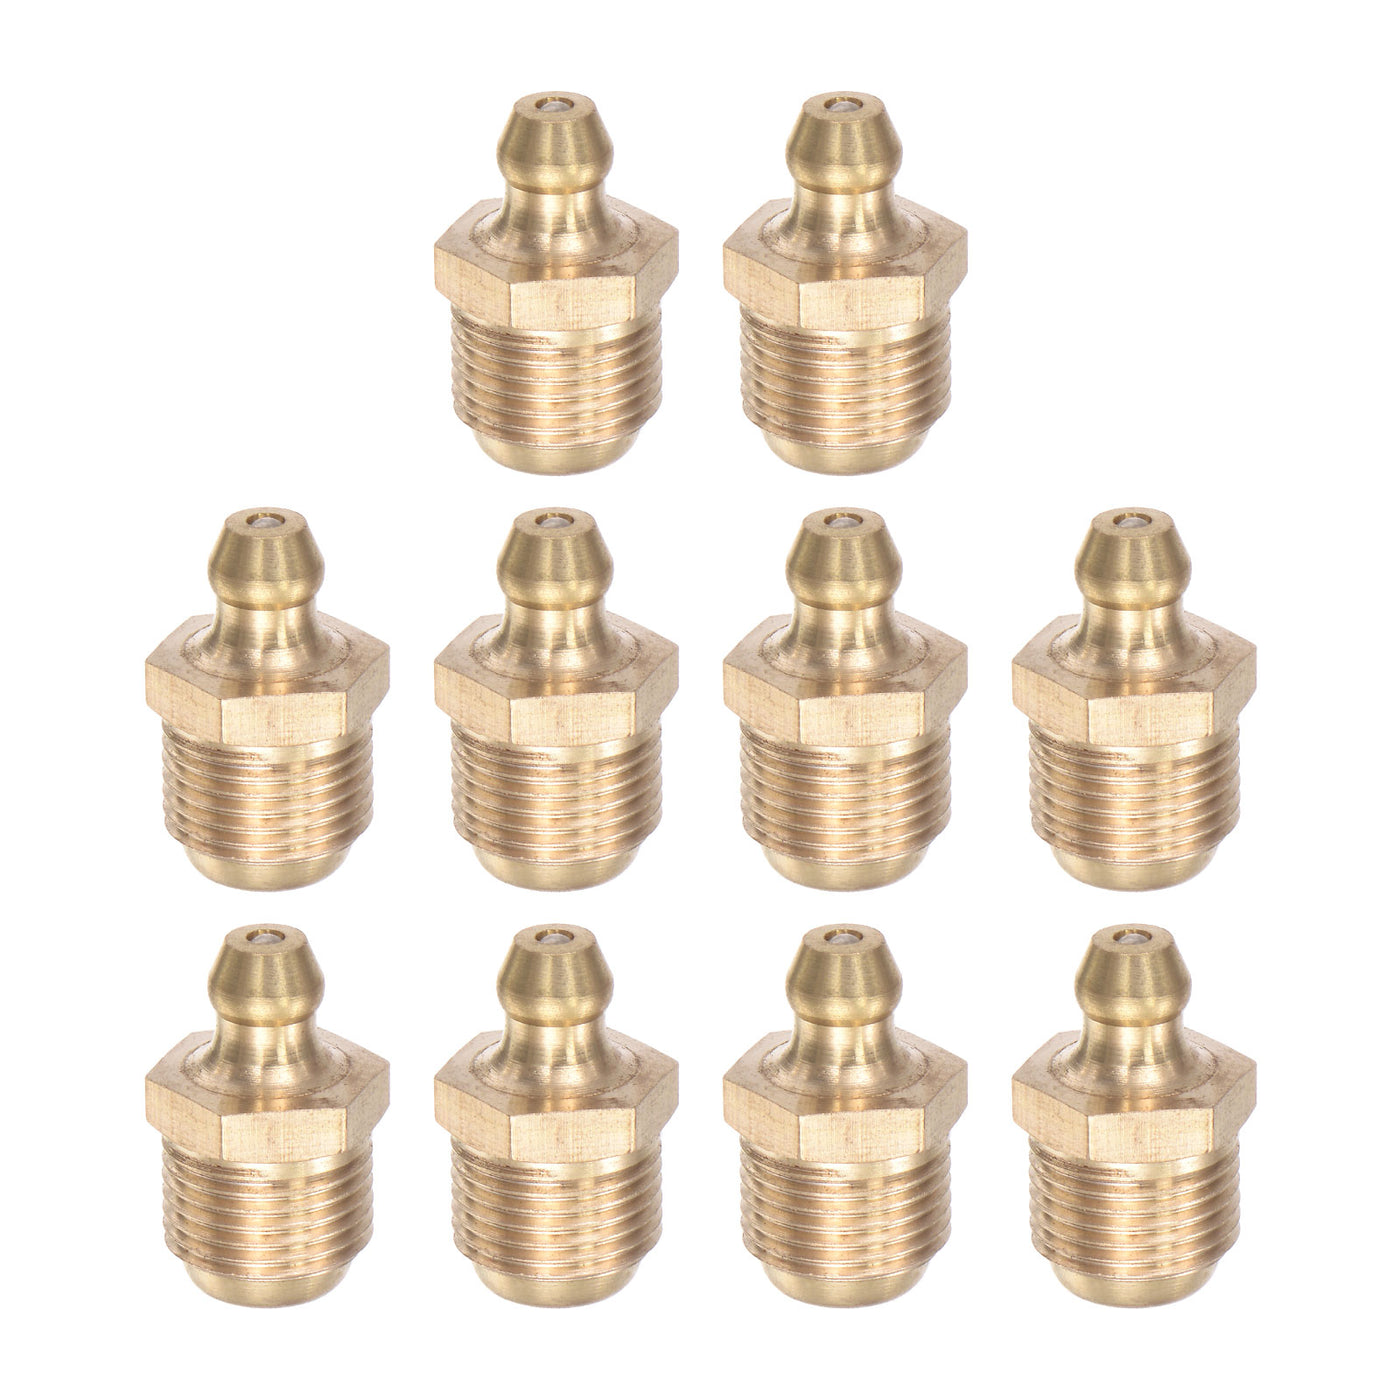 Uxcell Uxcell Brass Hydraulic Grease Fitting Assortment M10 x 1mm Thread, 10Pcs